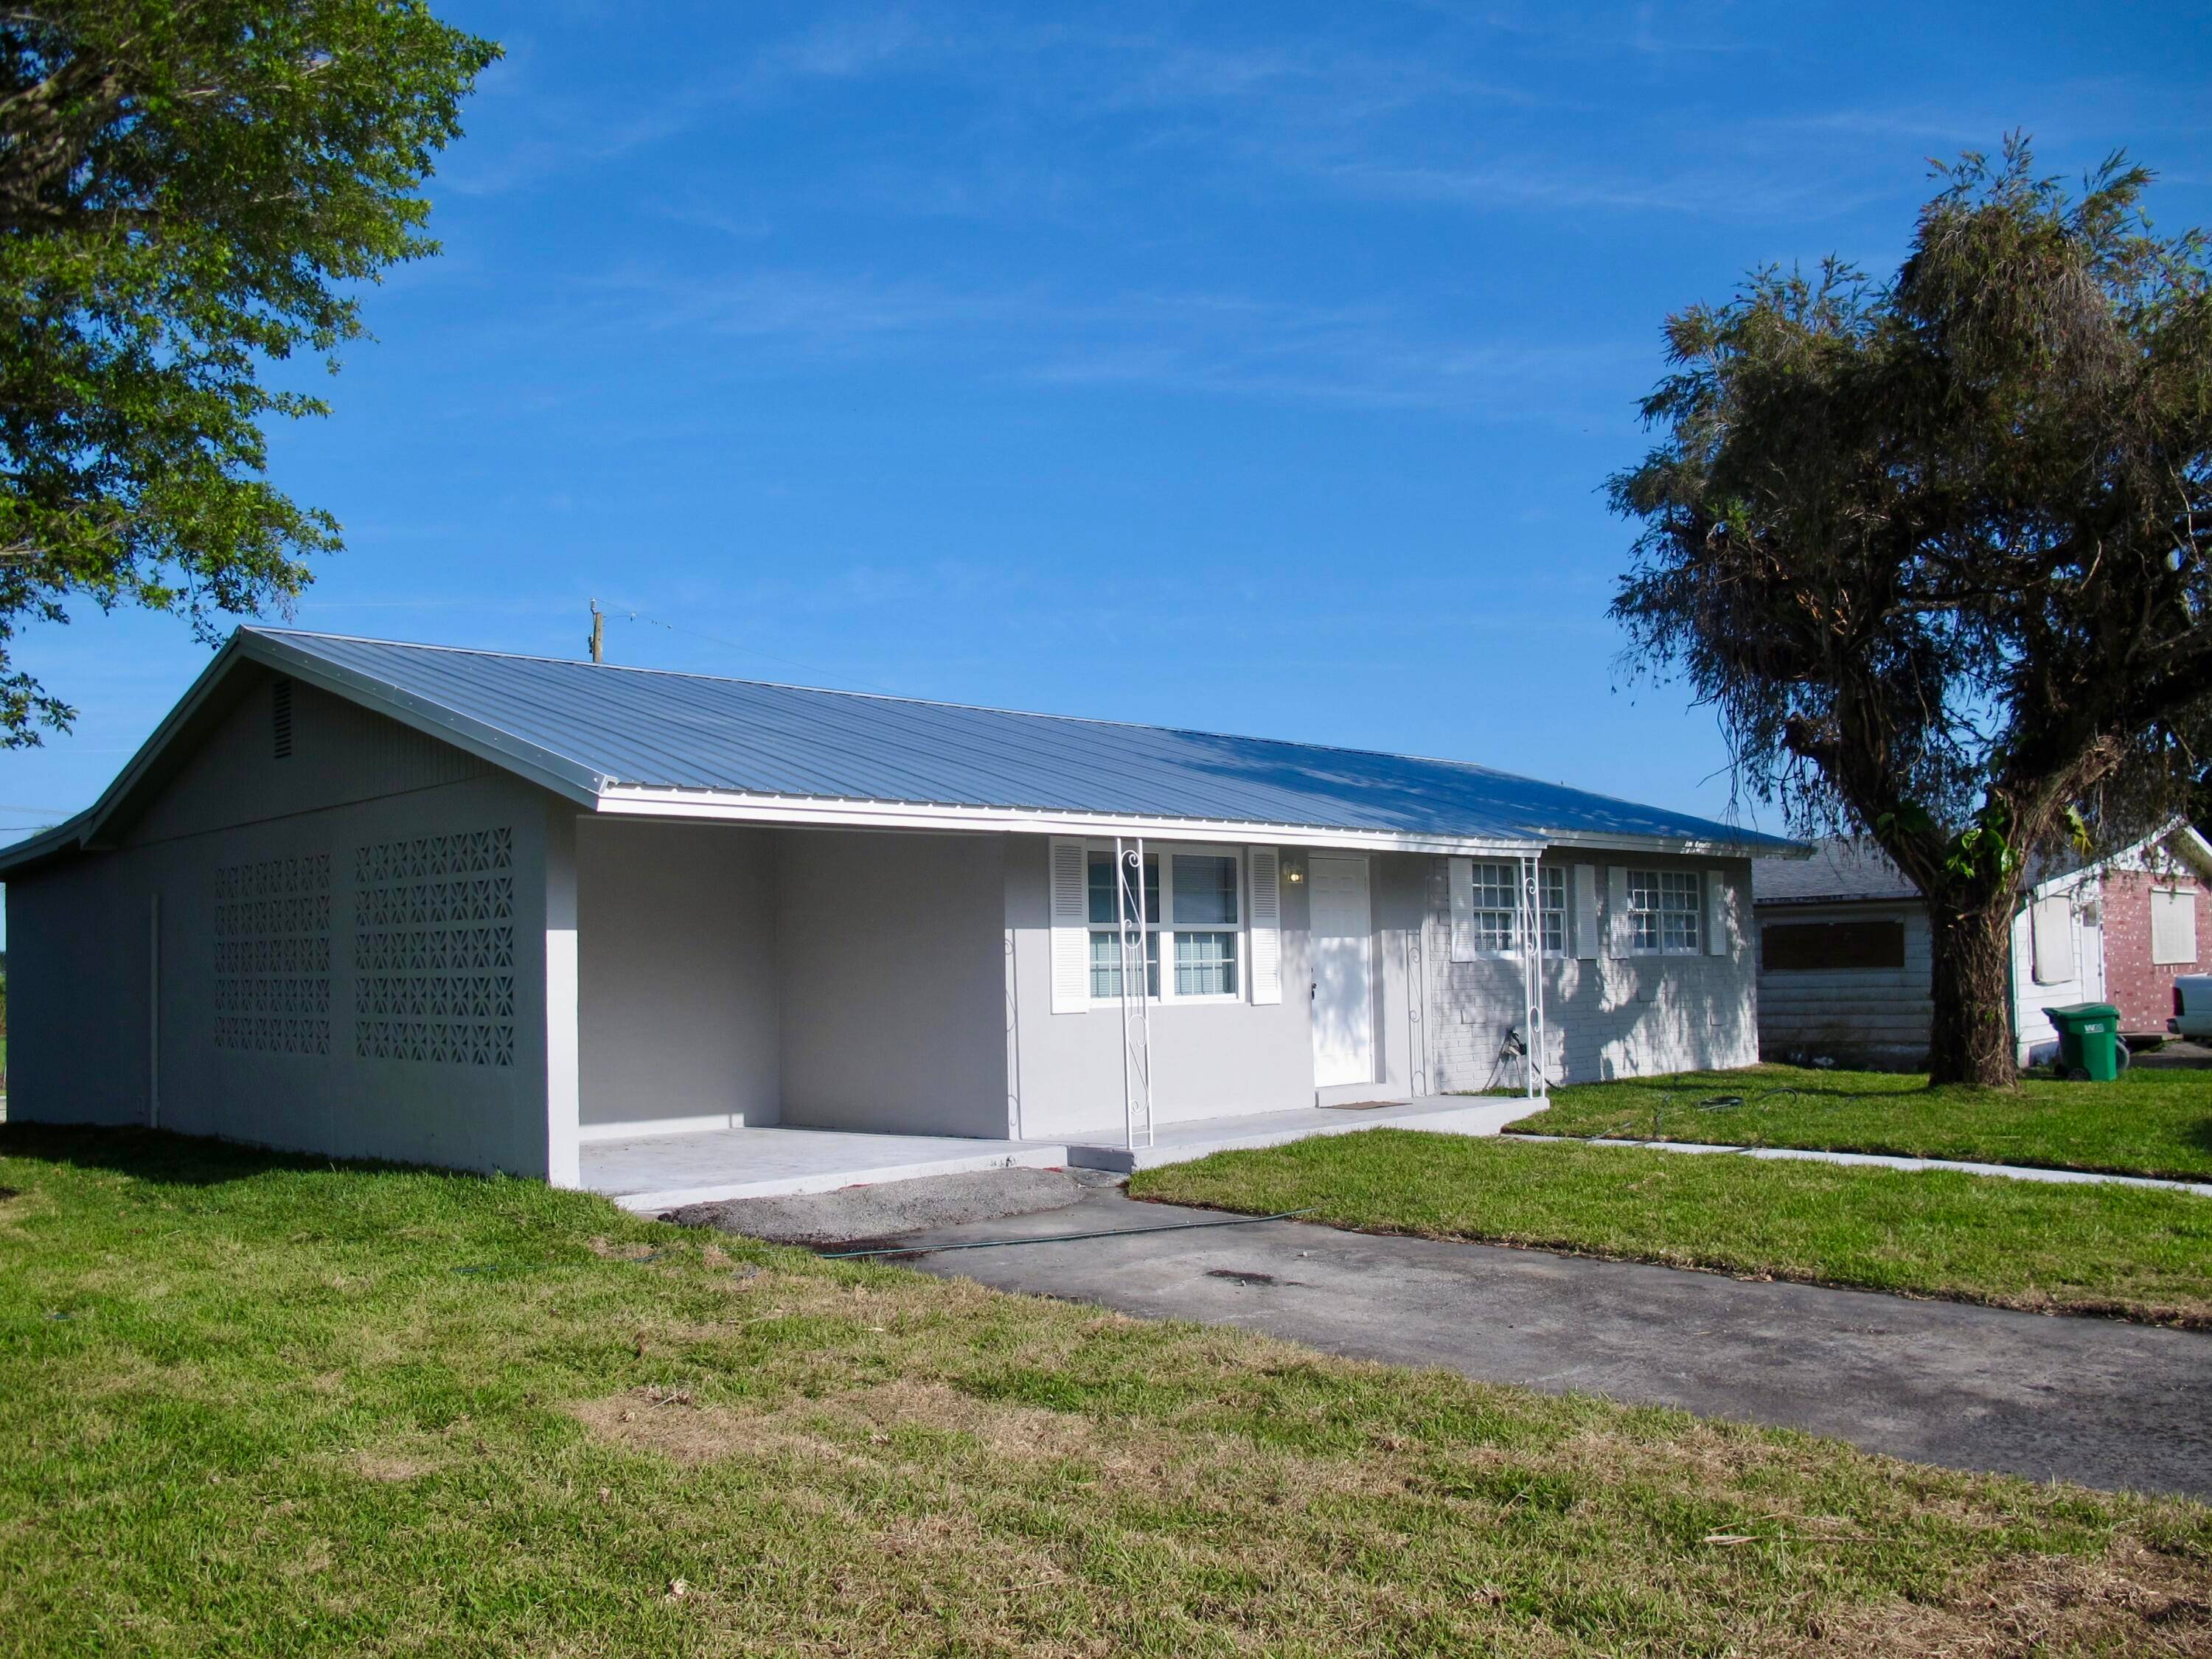 Beautifully renovated home located in the heart of Pahokee and within walking distance of Floridas historic Lake Okeechobee.